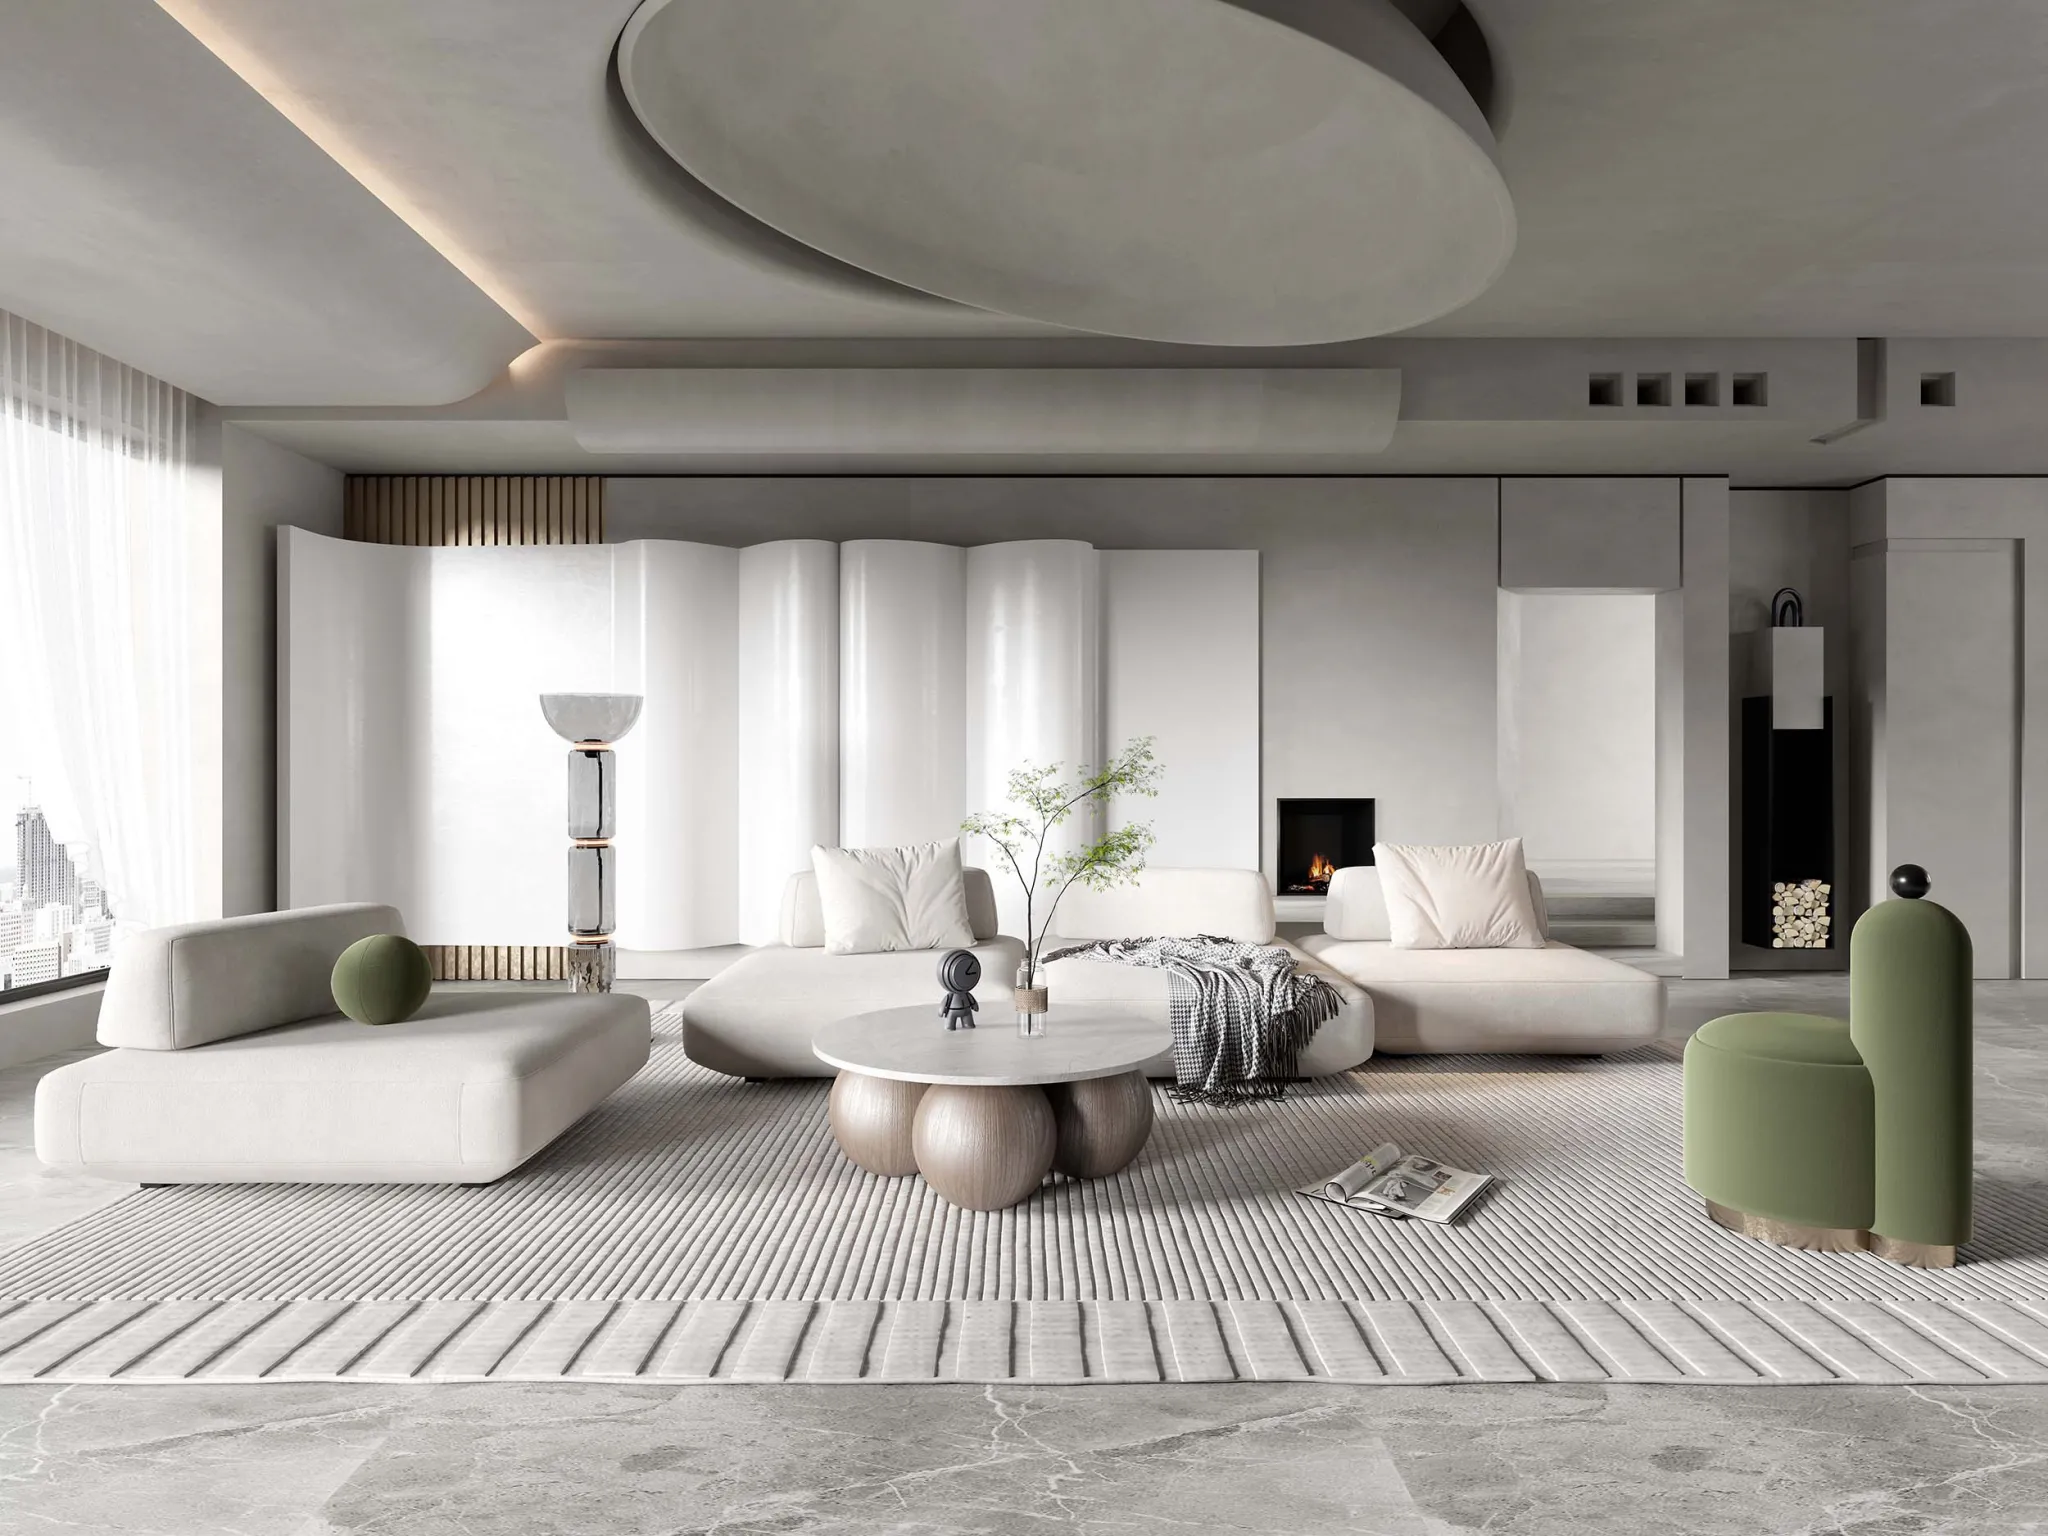 HOUSE SPACE 3D SCENES – LIVING ROOM – 0178